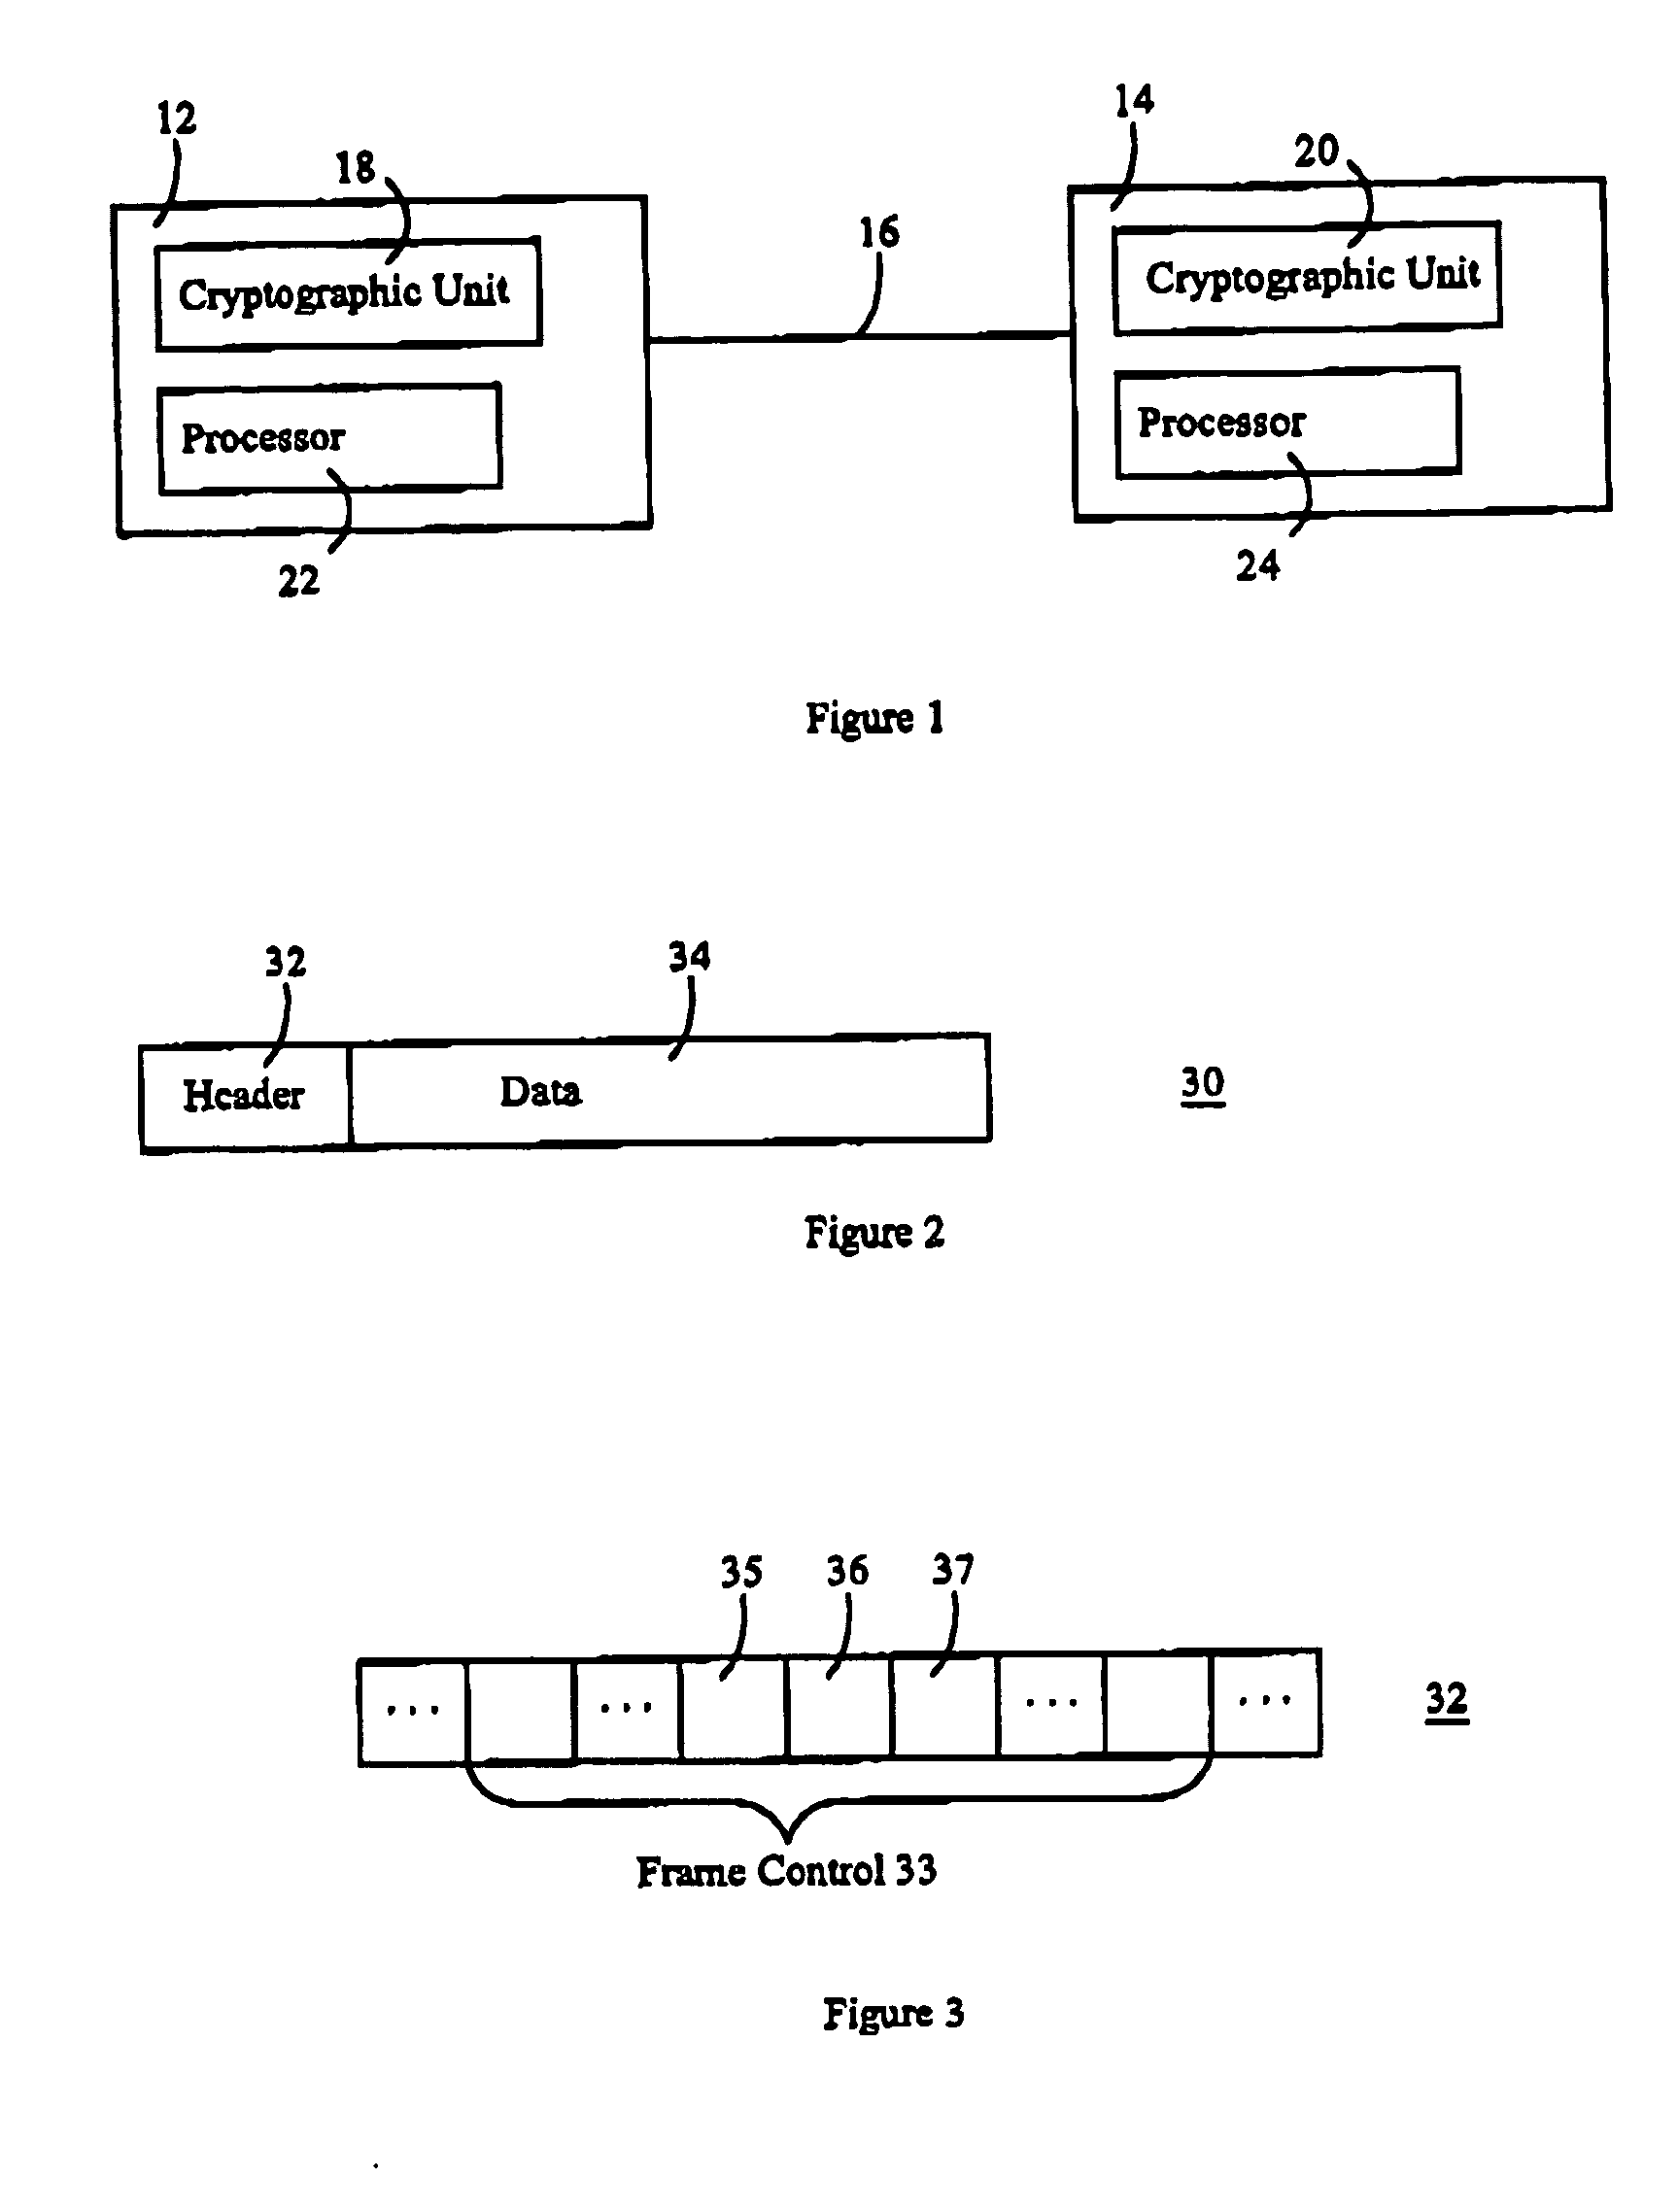 Method and apparatus for synchronizing an adaptable security level in an electronic communication